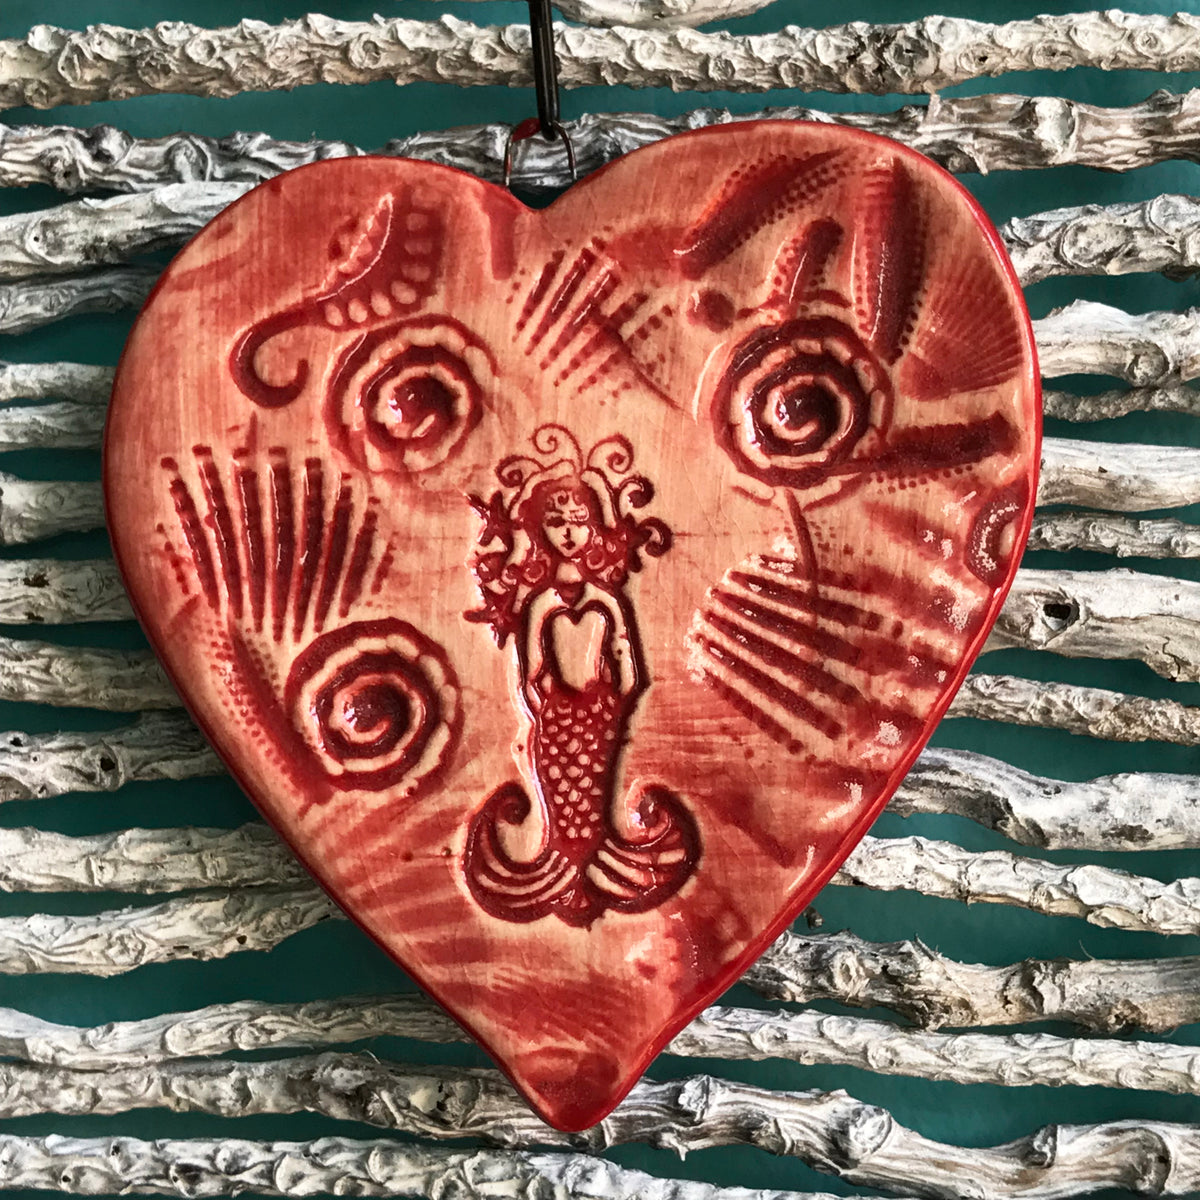 Unusual handcrafted holiday ornament of a mermaid surrounded by sea life.  Glazed in bright red.  